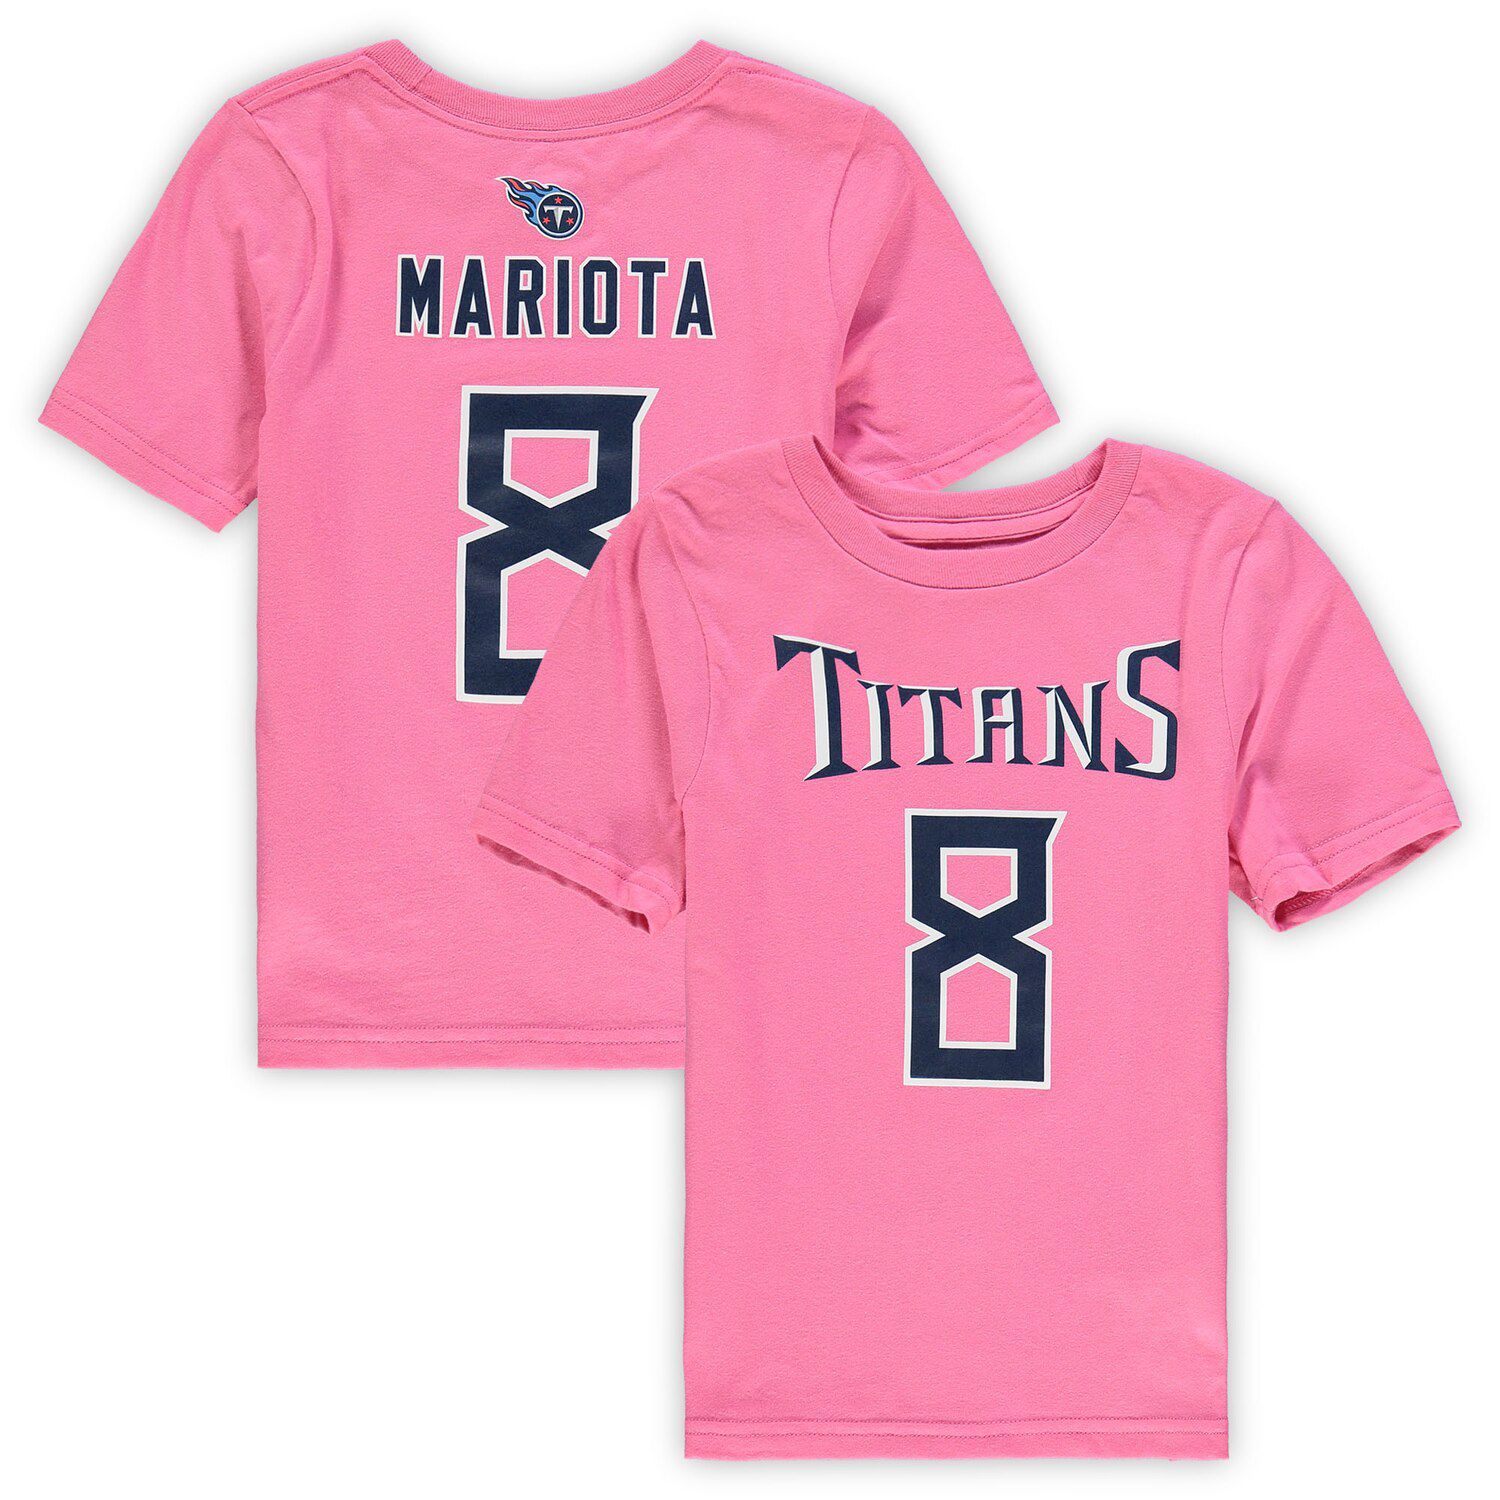 pink tennessee titans shirt